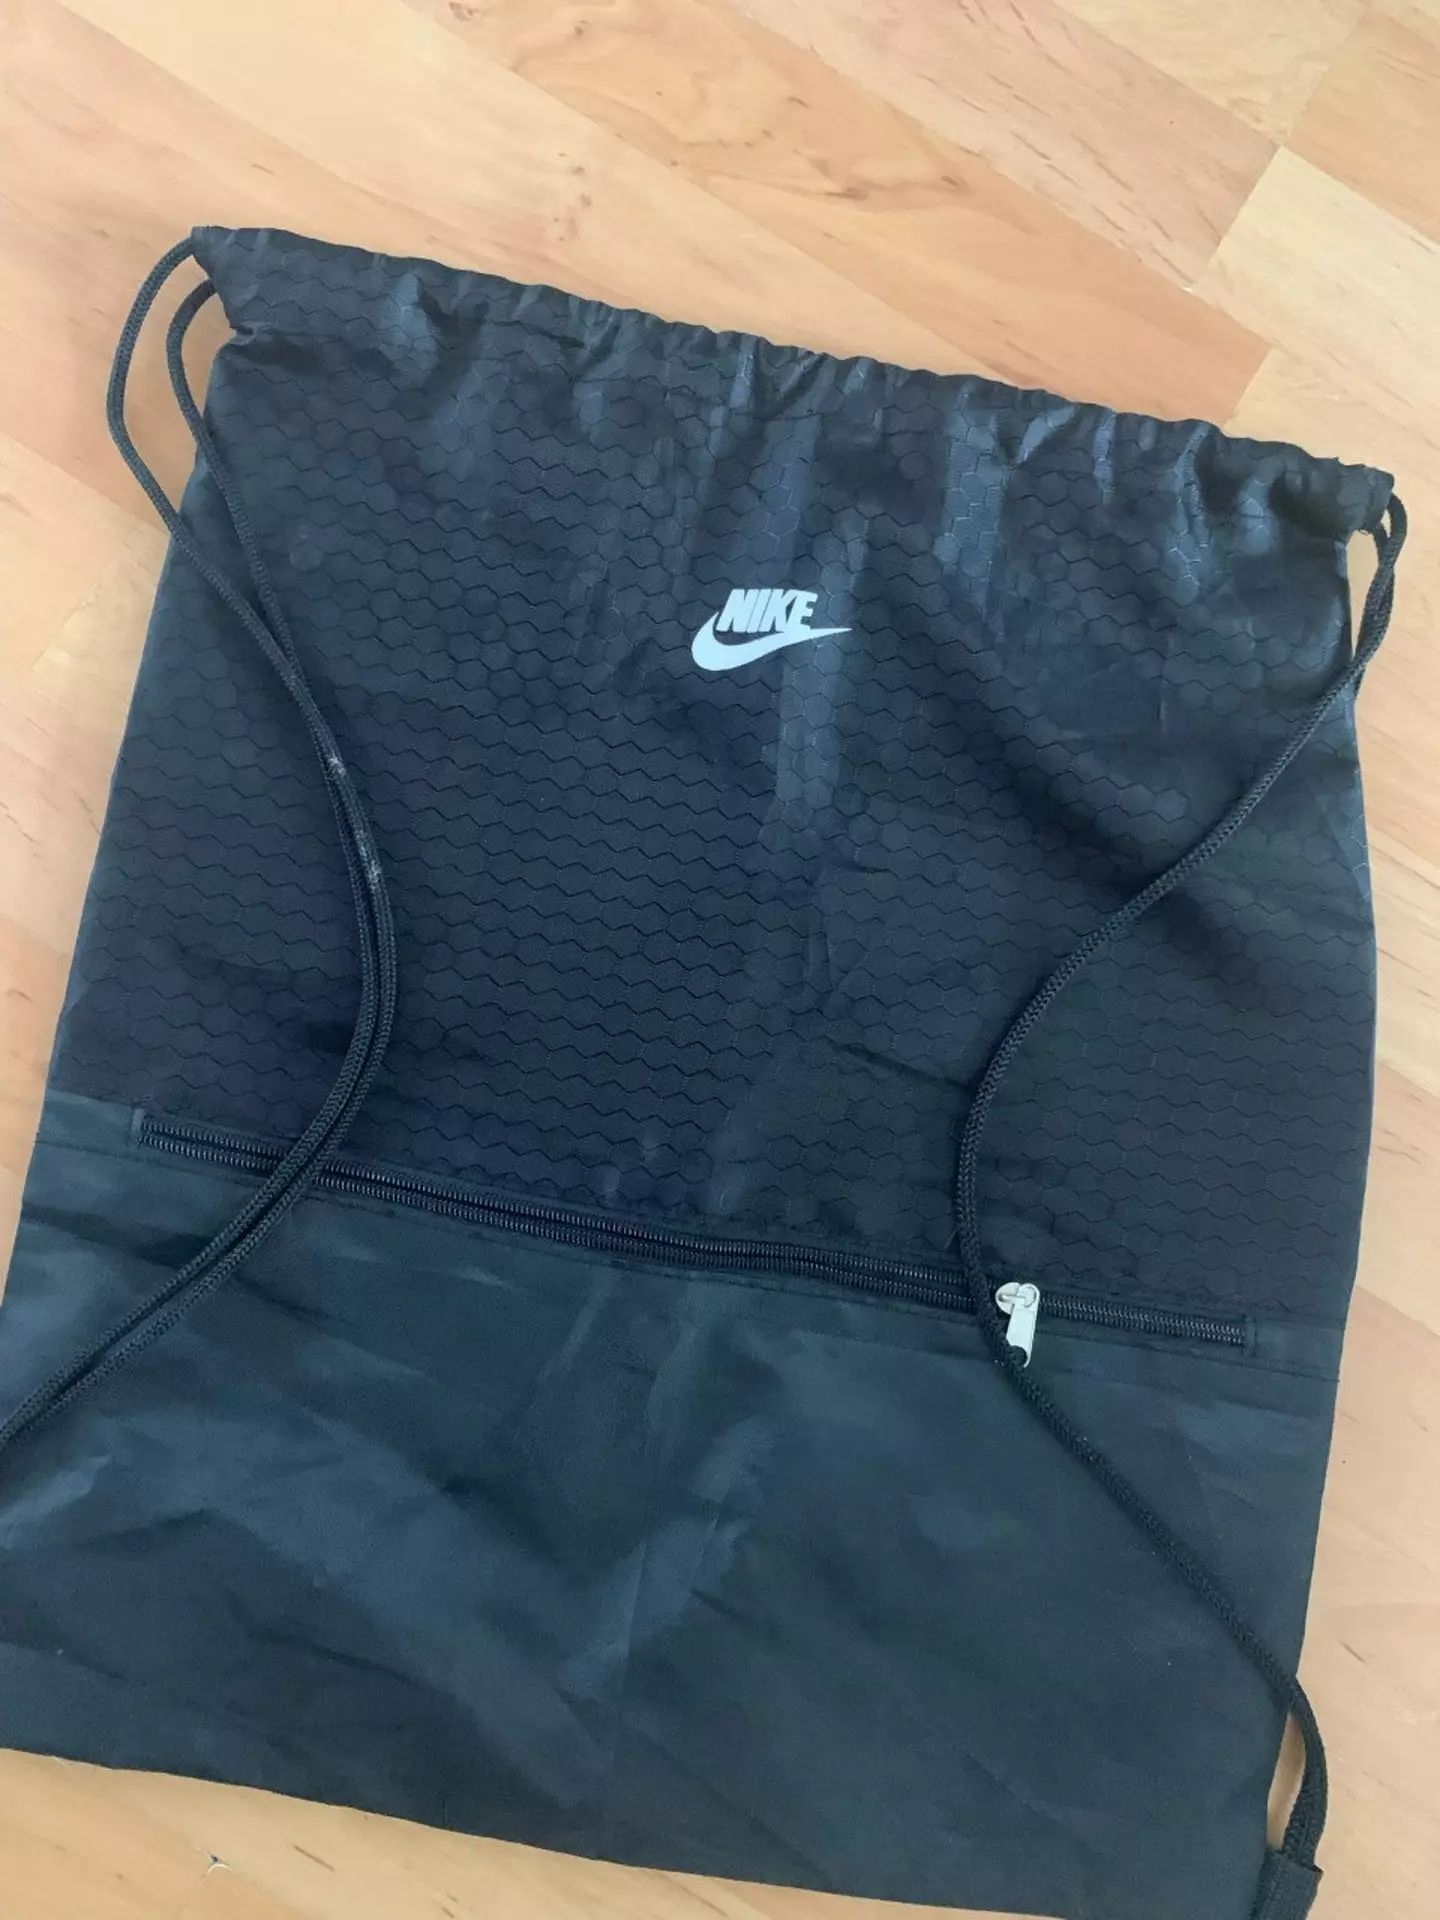 A nifty Northampton mum has gone viral after revealing she prints Nike logos on Primark T-shirts and other cheap clothing.